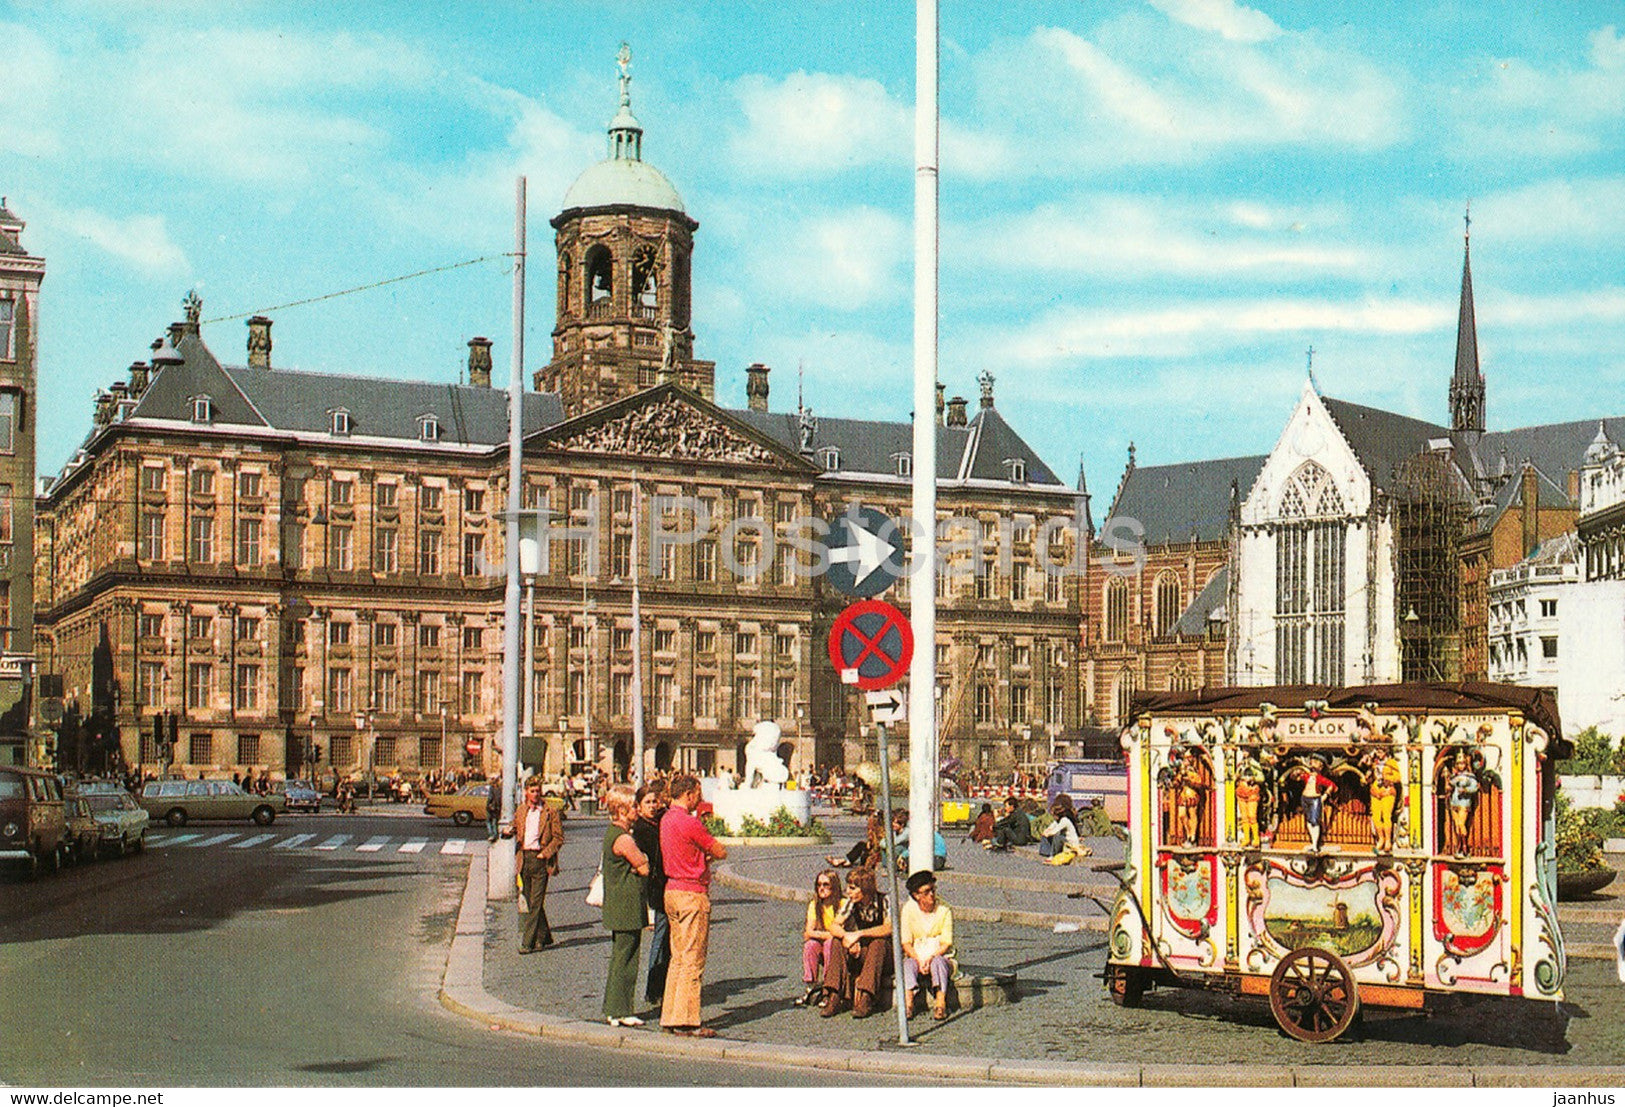 Amsterdam - The Royal Palace dominating the Dam Square - Netherlands - unused - JH Postcards